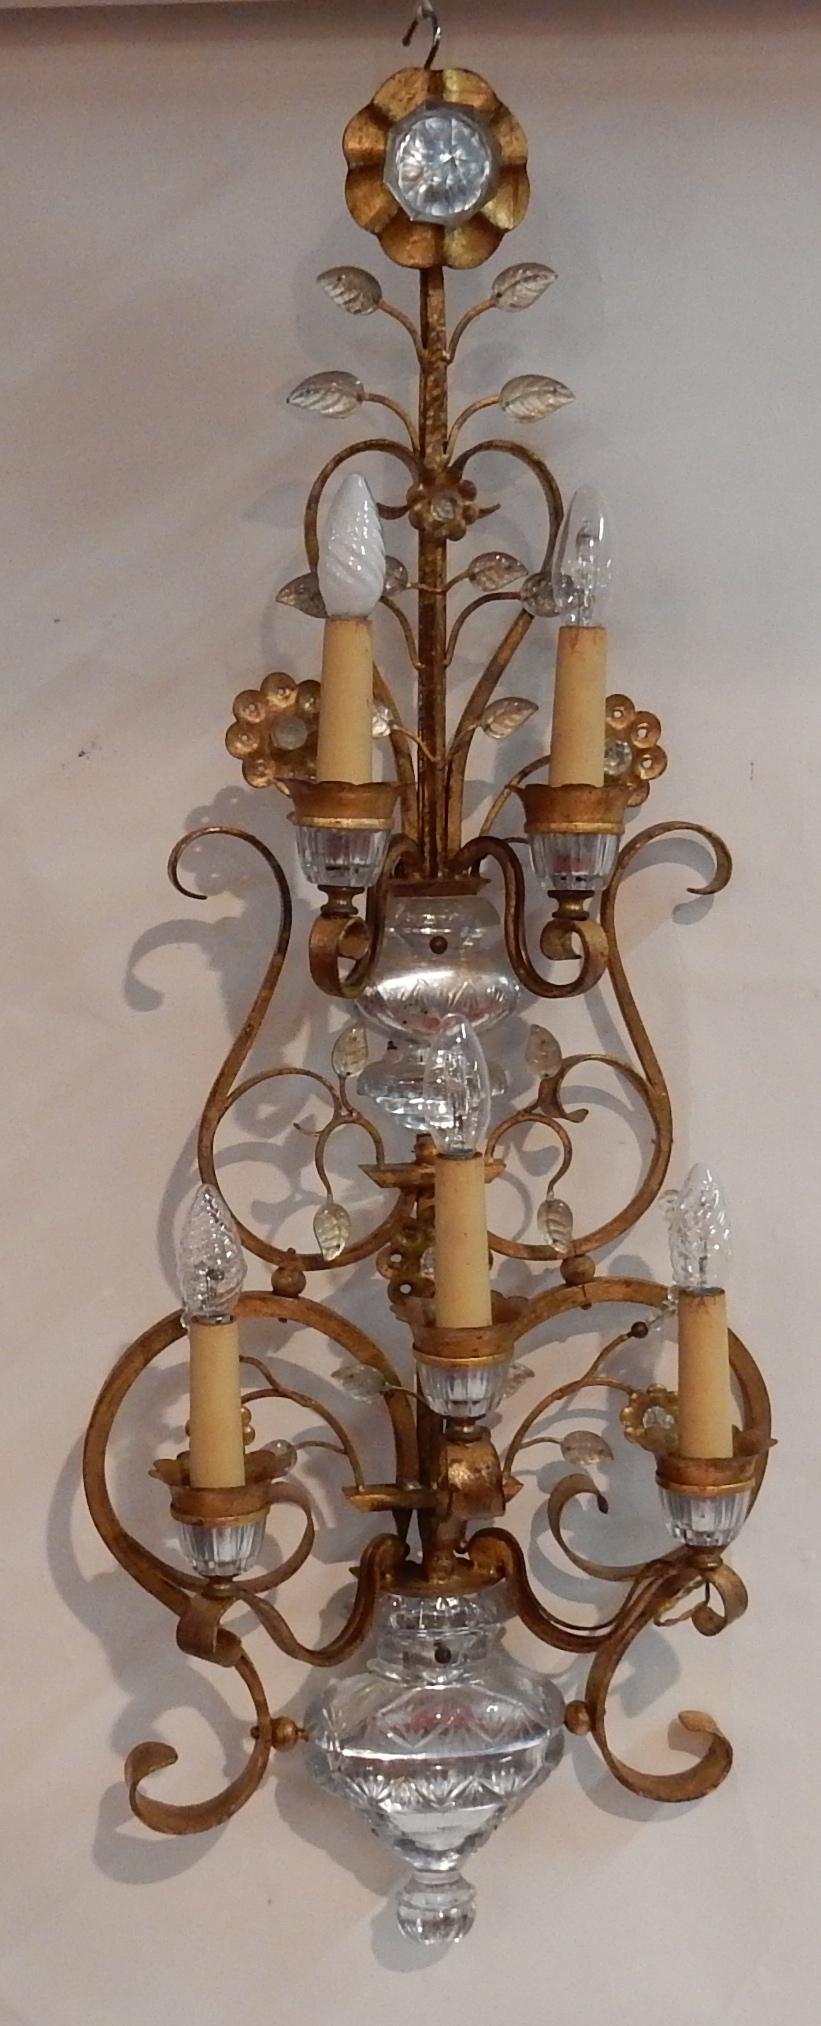 patina iron wall lamp decorated with crystal or glass. Urn and leaf decoration
Maison Banci
Circa 1970
Good condition

Measures: Length : 104 cm
Width : 40 cm
Depth : 16 cm.